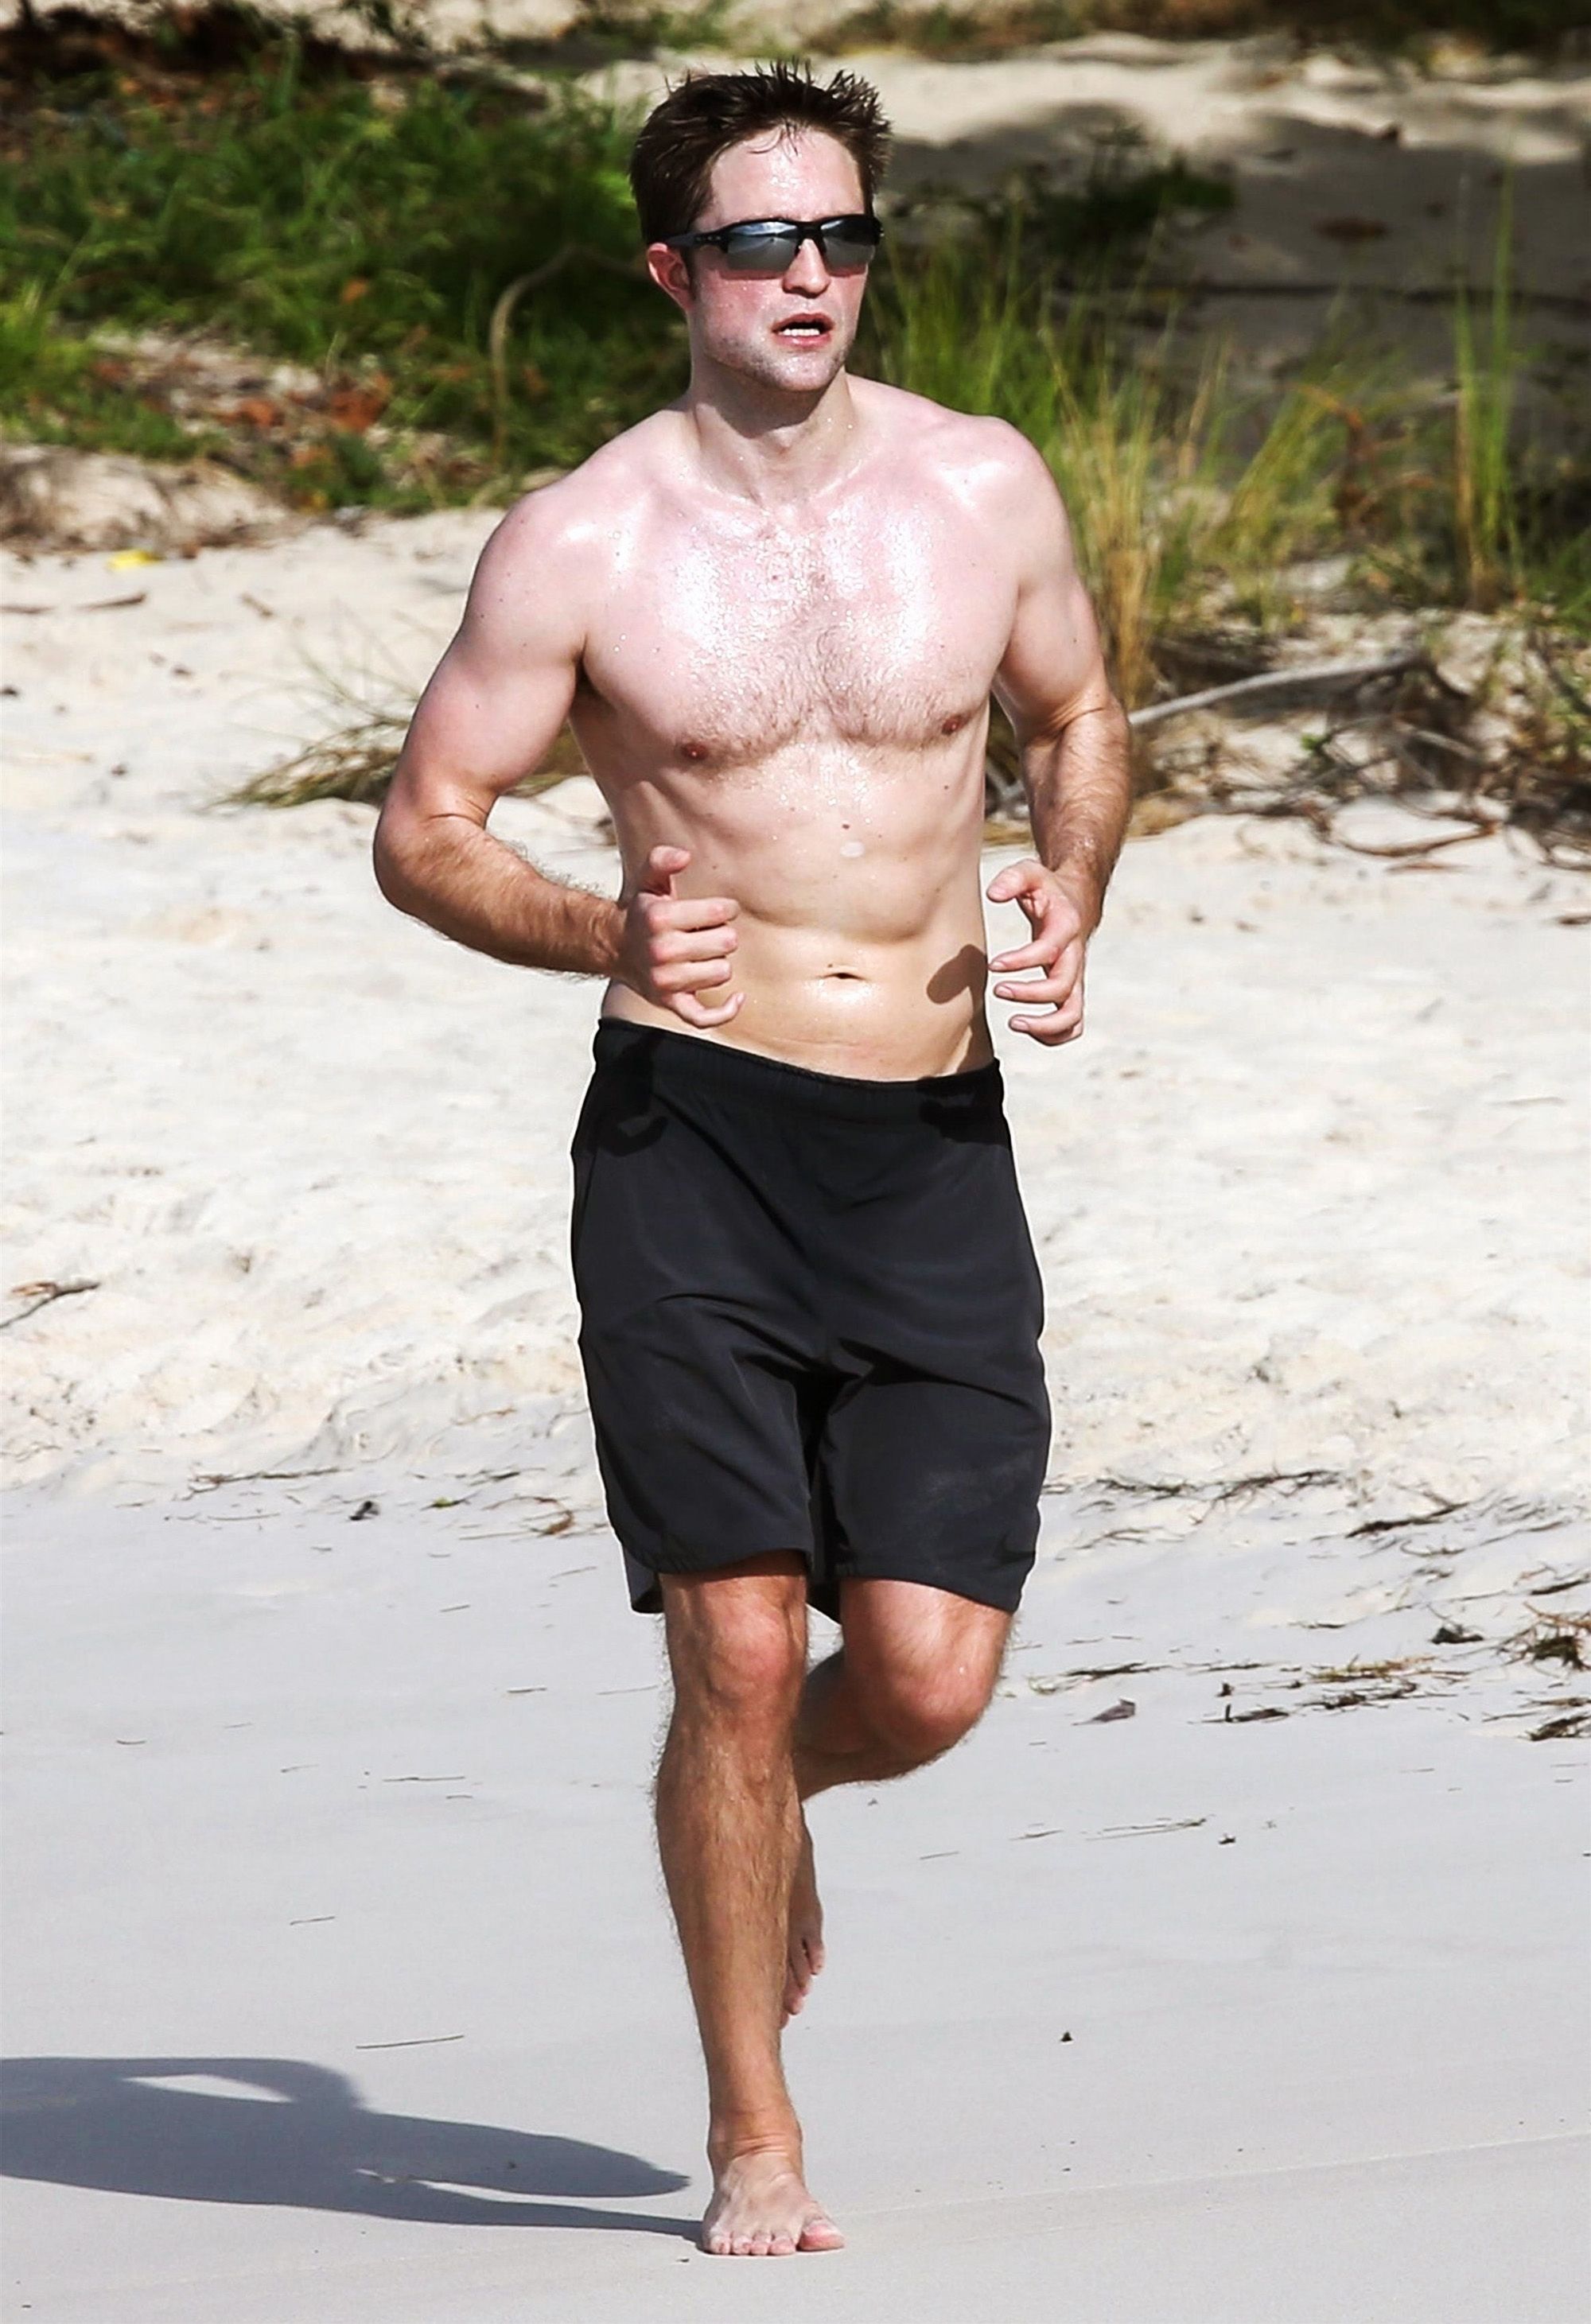 The Four Body Types, Fellow One Research - Celebrity Robert Pattinson Body Type One (BT1) Shape Physique